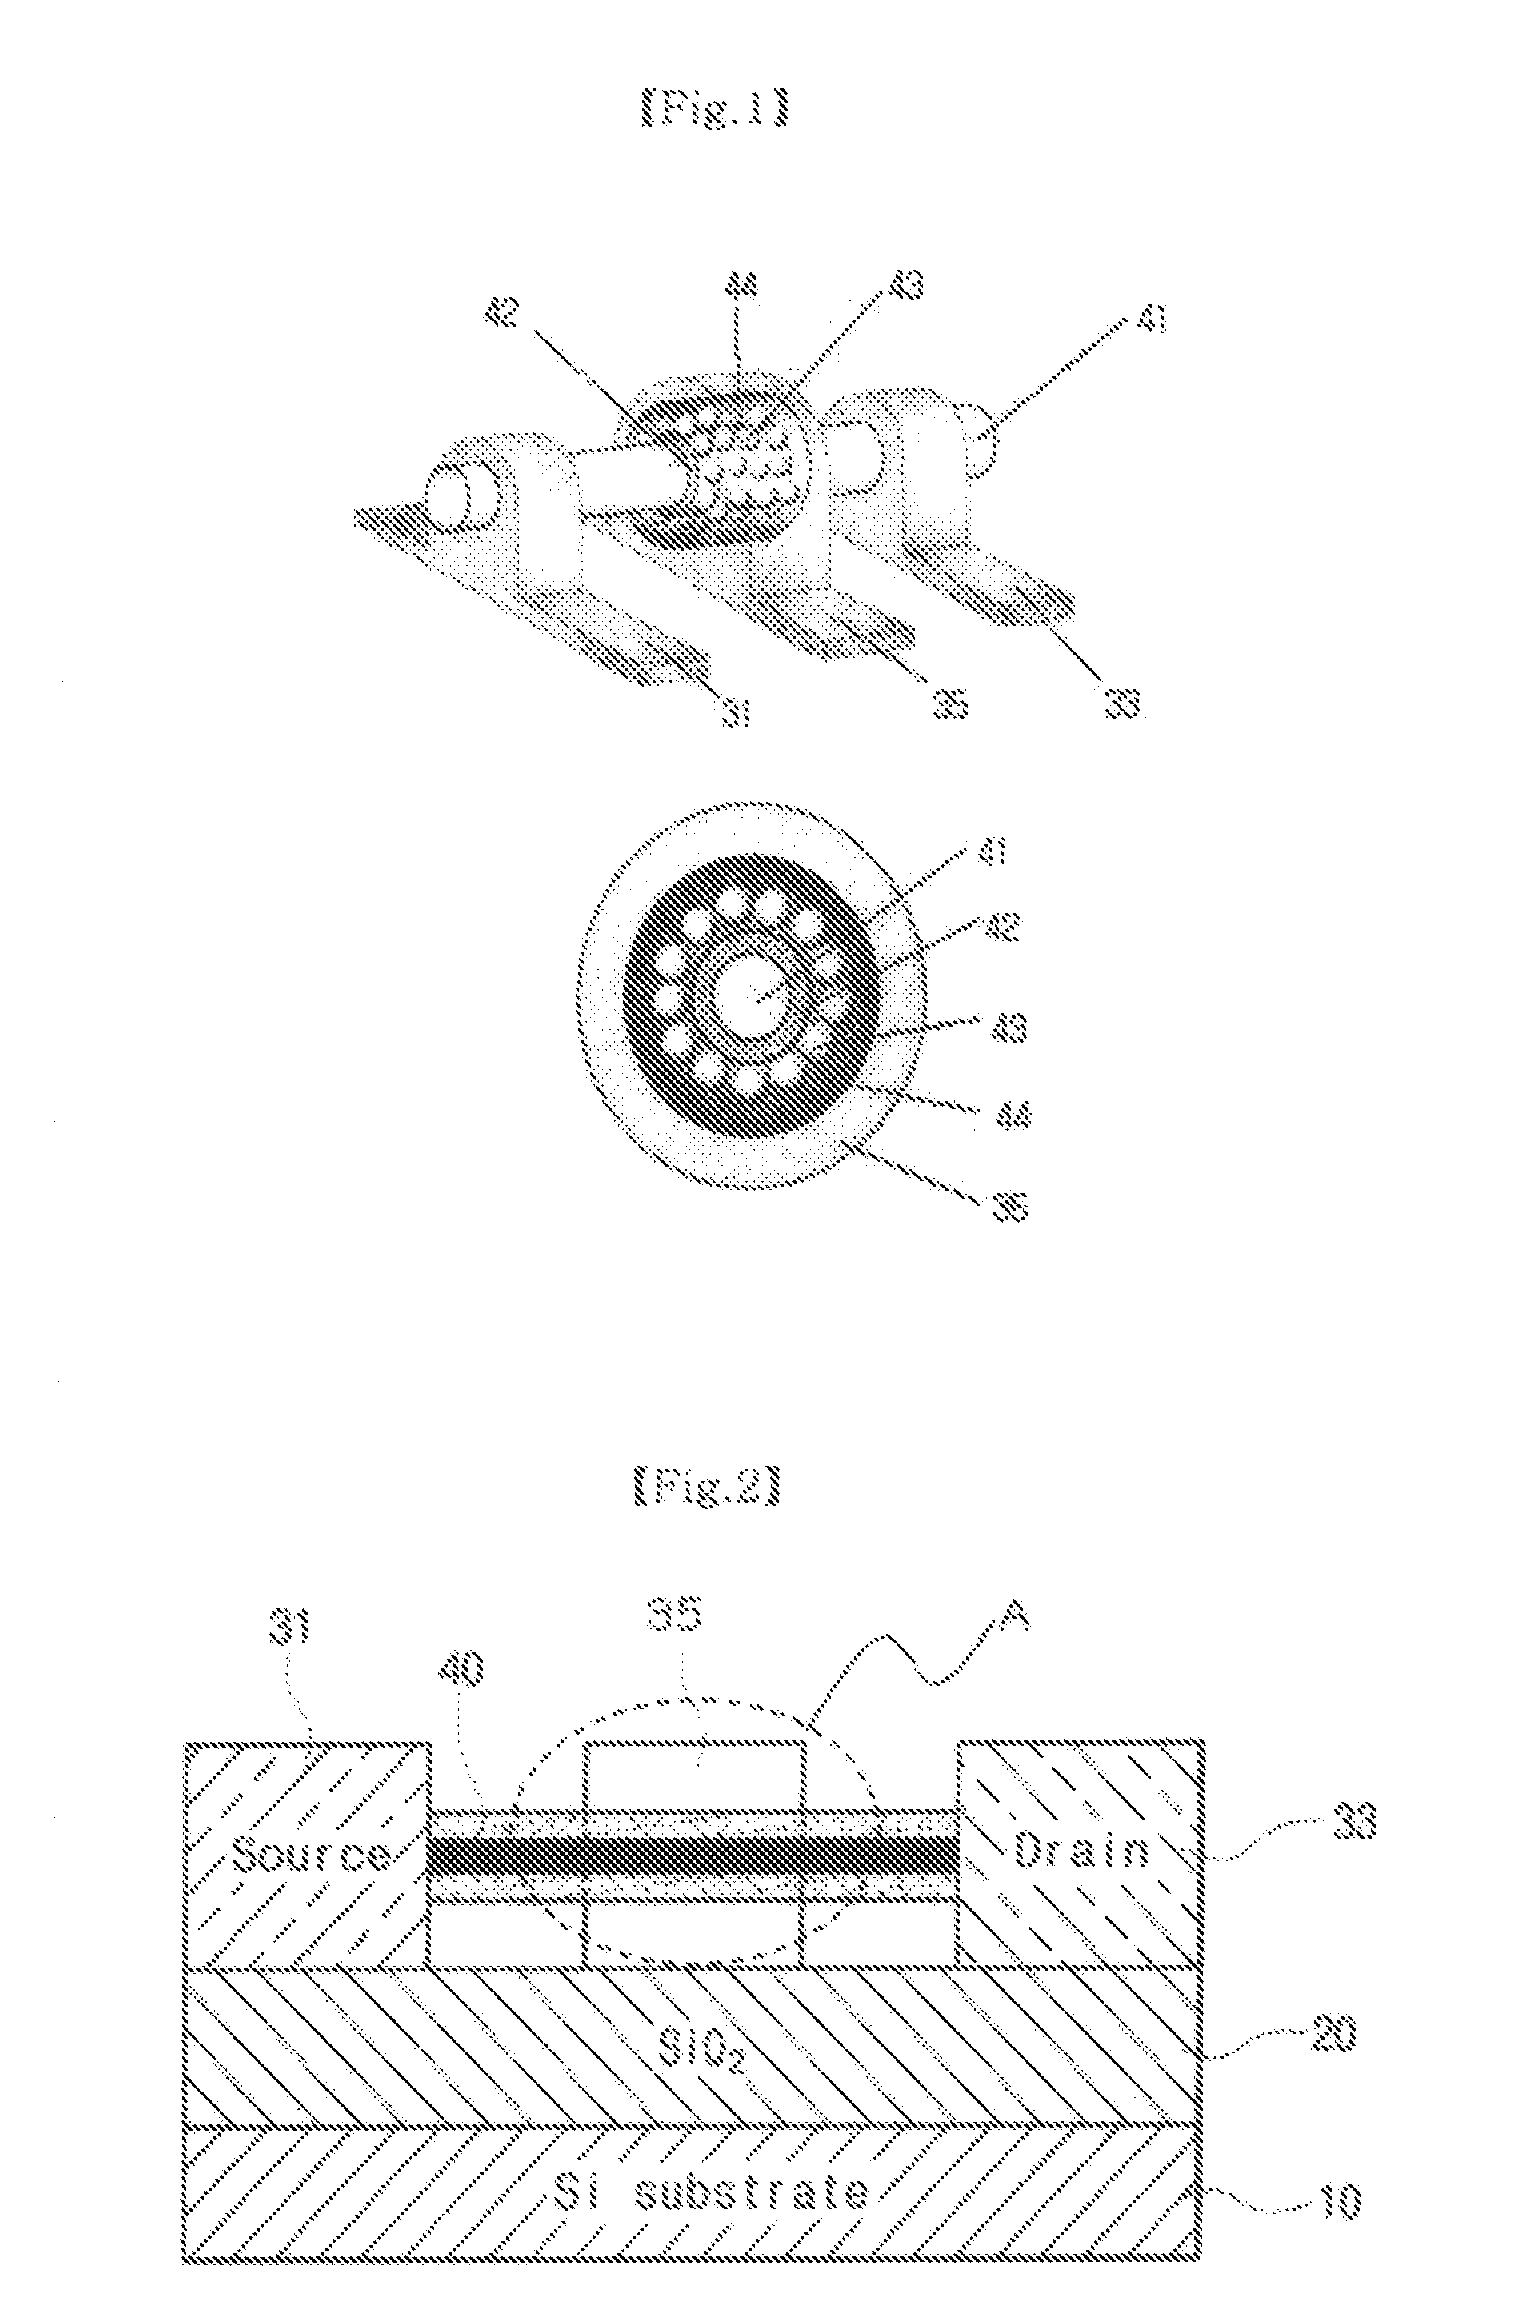 Nonvolatile memory electronic device including nanowire channel and nanoparticle-floating gate nodes and a method for fabricating the same